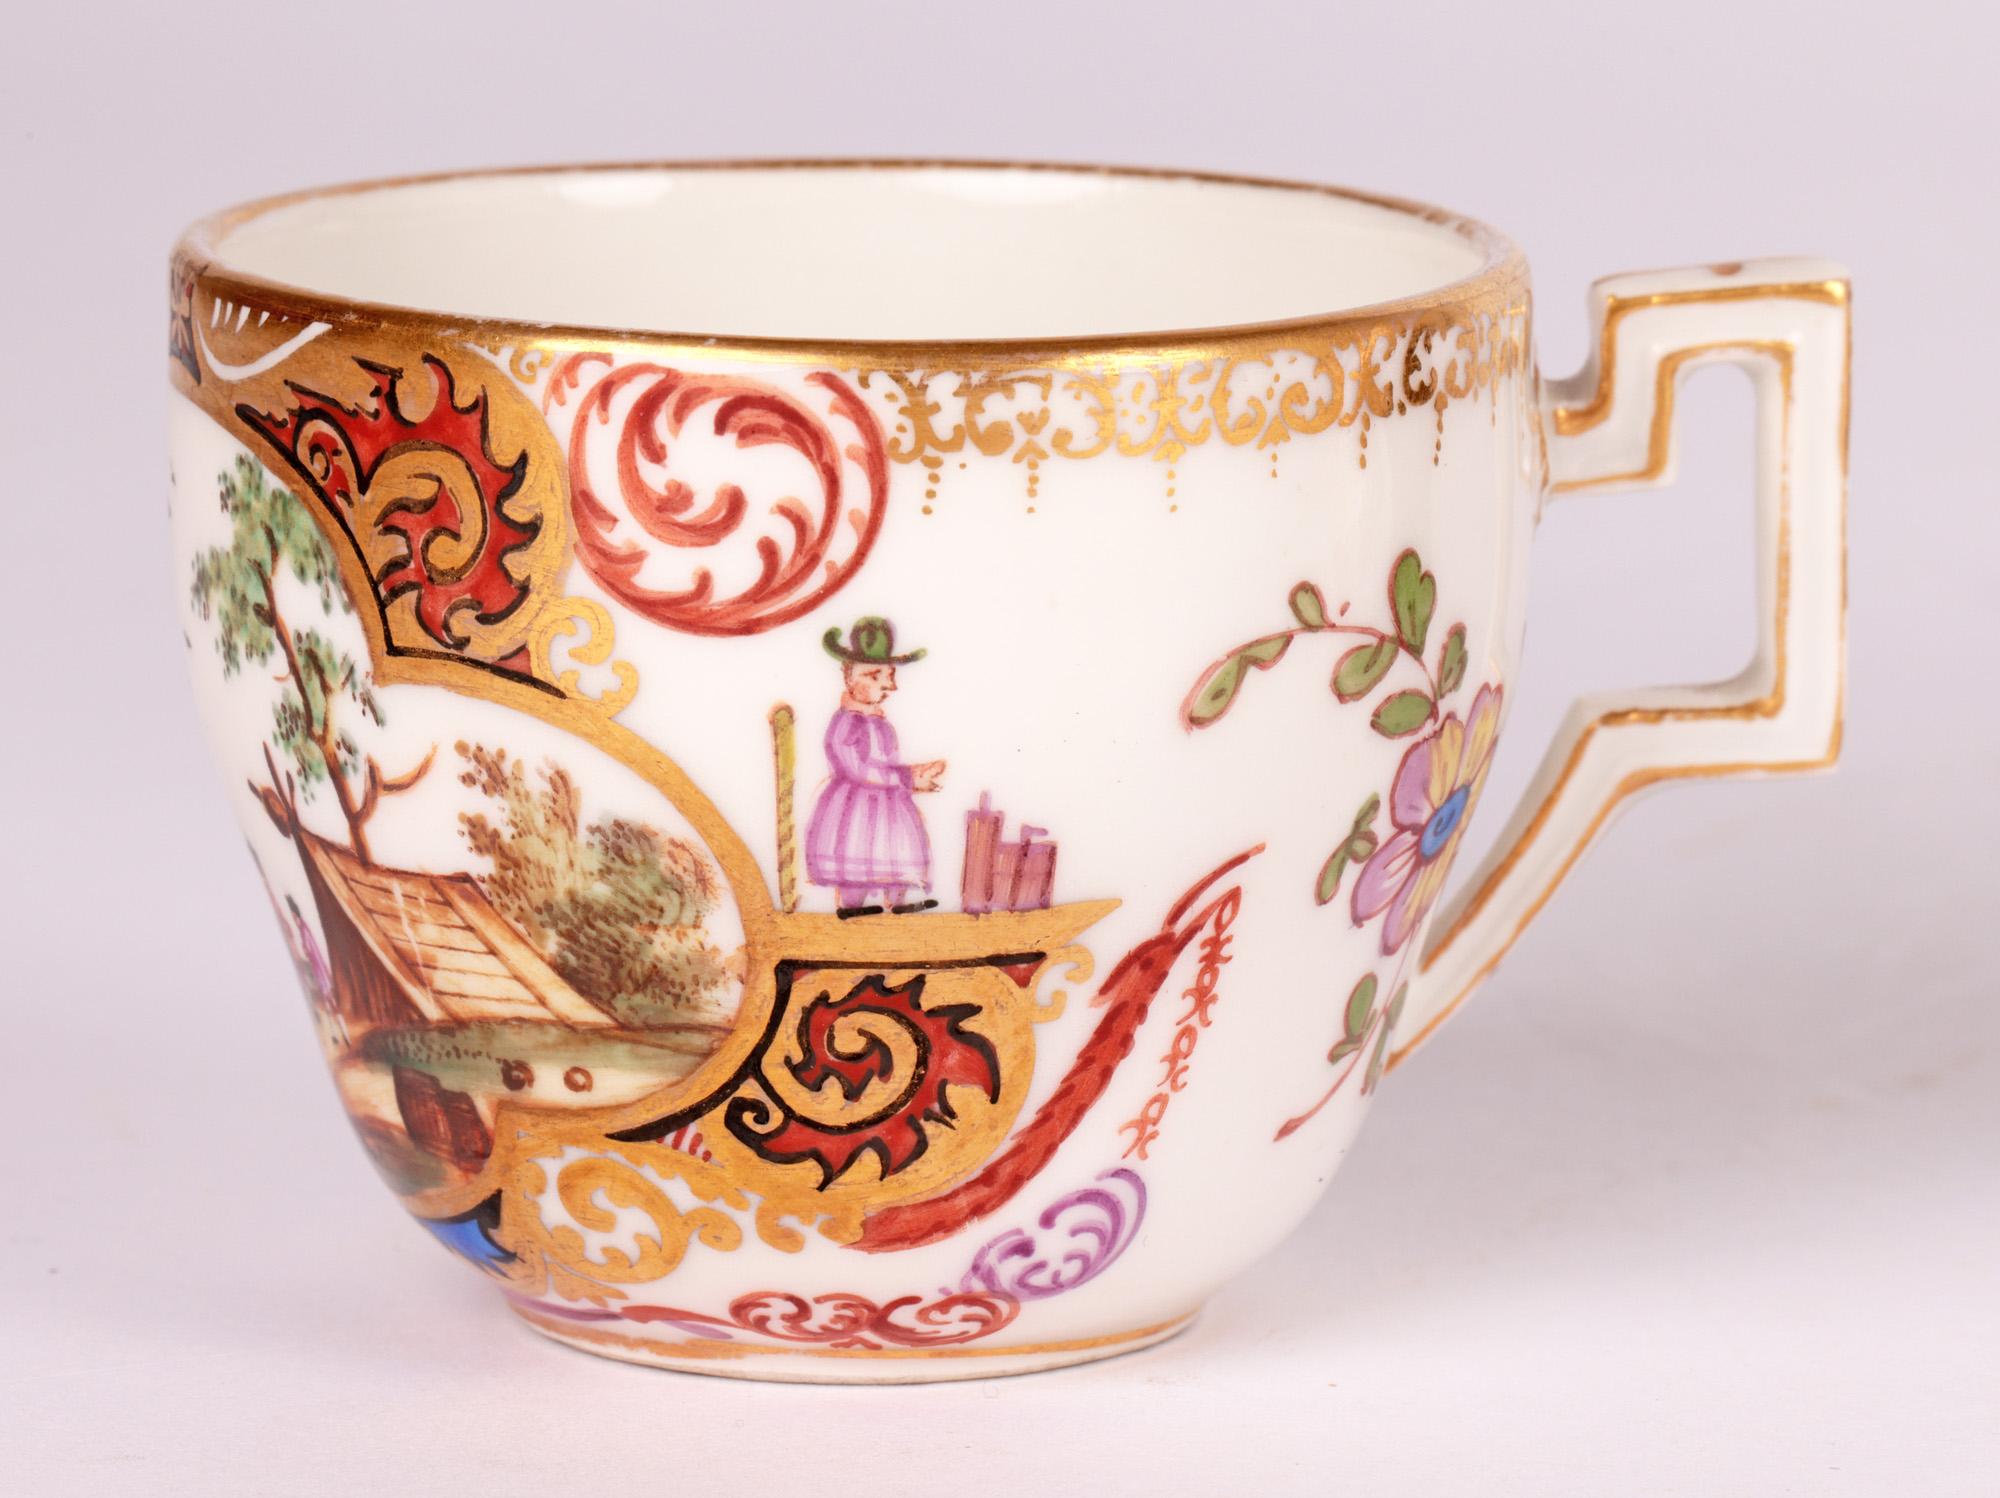 A very fine German Meissen porcelain cabinet coffee cup and saucer hand painted with shipping scenes dating from the 19th century. The cup is of small round shape standing on a narrow unglazed foot with recessed base and with a square angle shaped